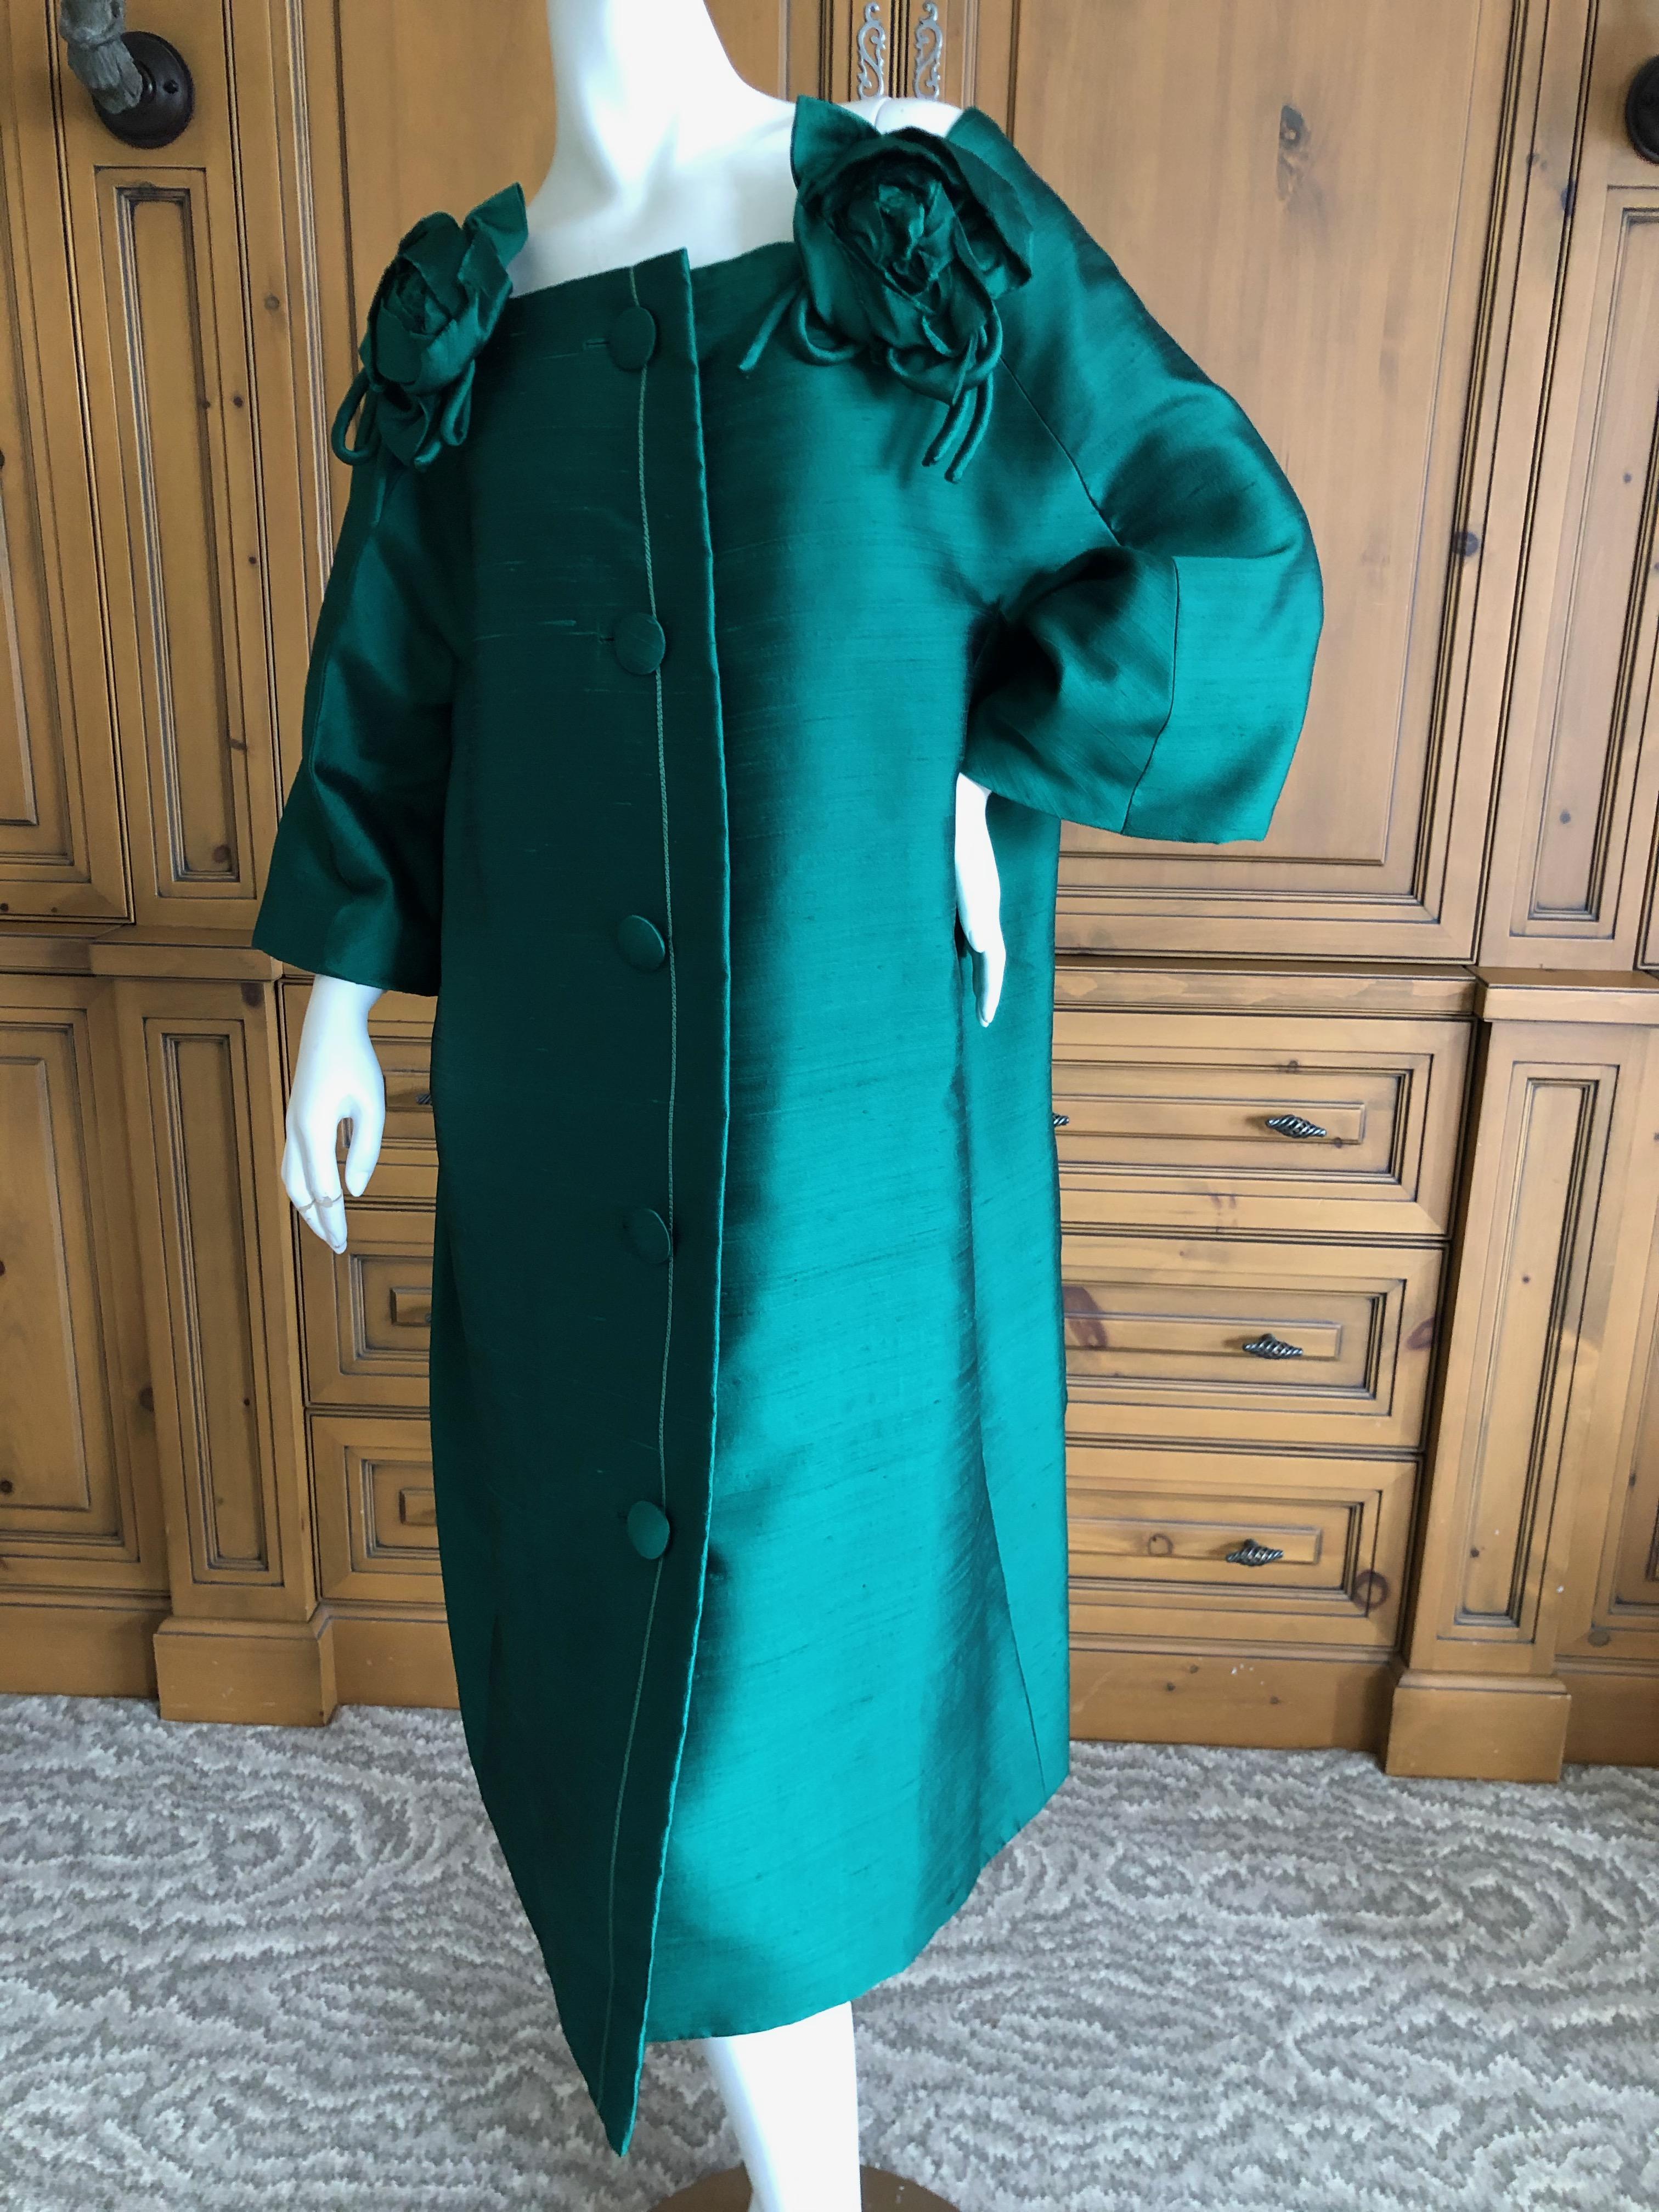 Christian Dior Printemps 1959 Numbered Haute Couture Coat by Yves Saint Laurent For Sale 2